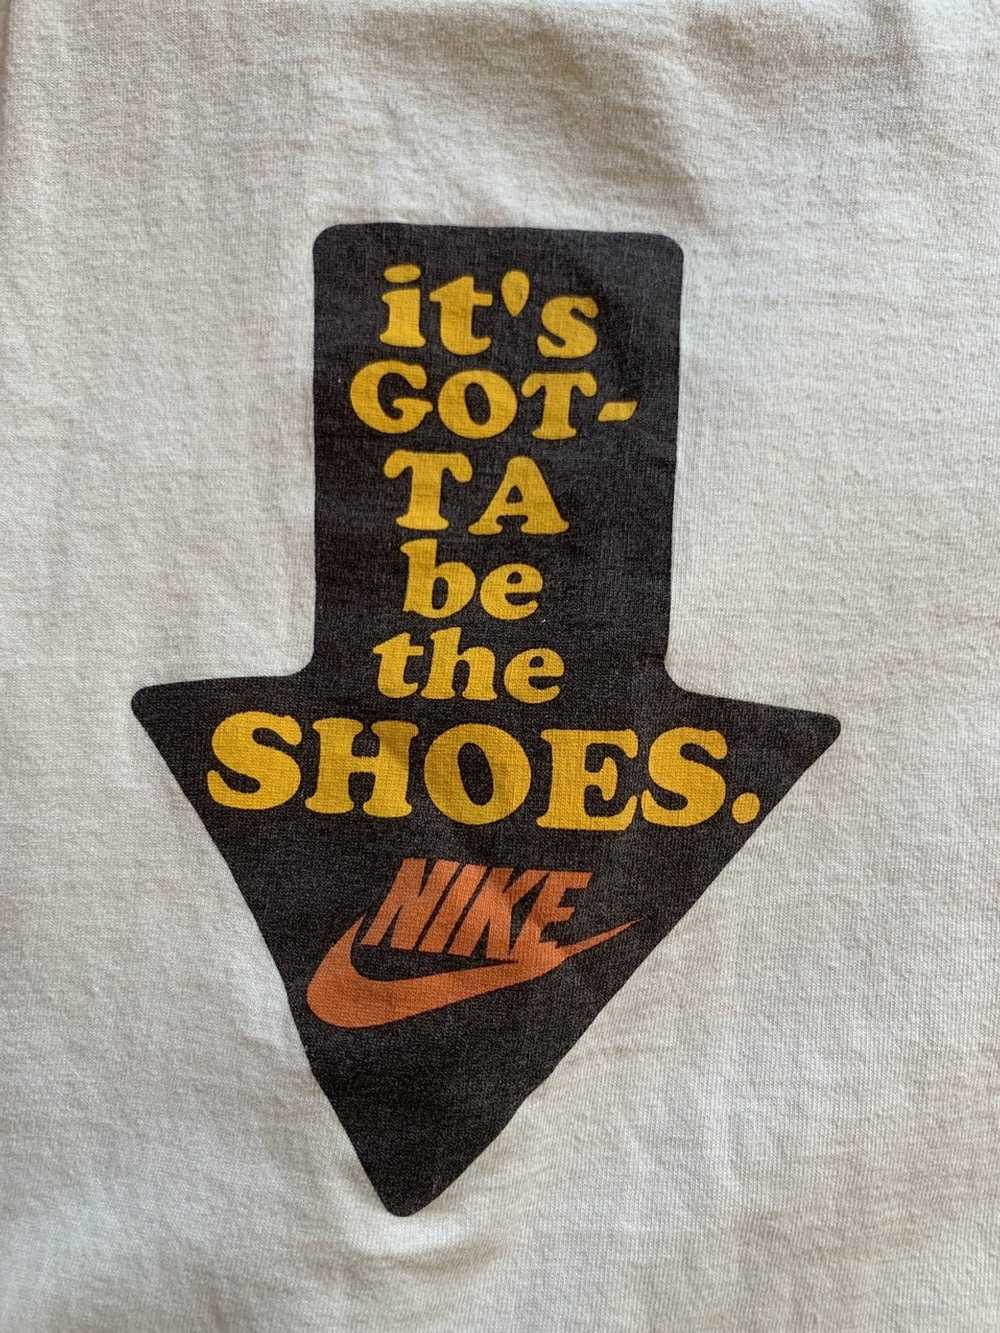 Vintage Nike “it’s gotta be the shoes.” - image 2